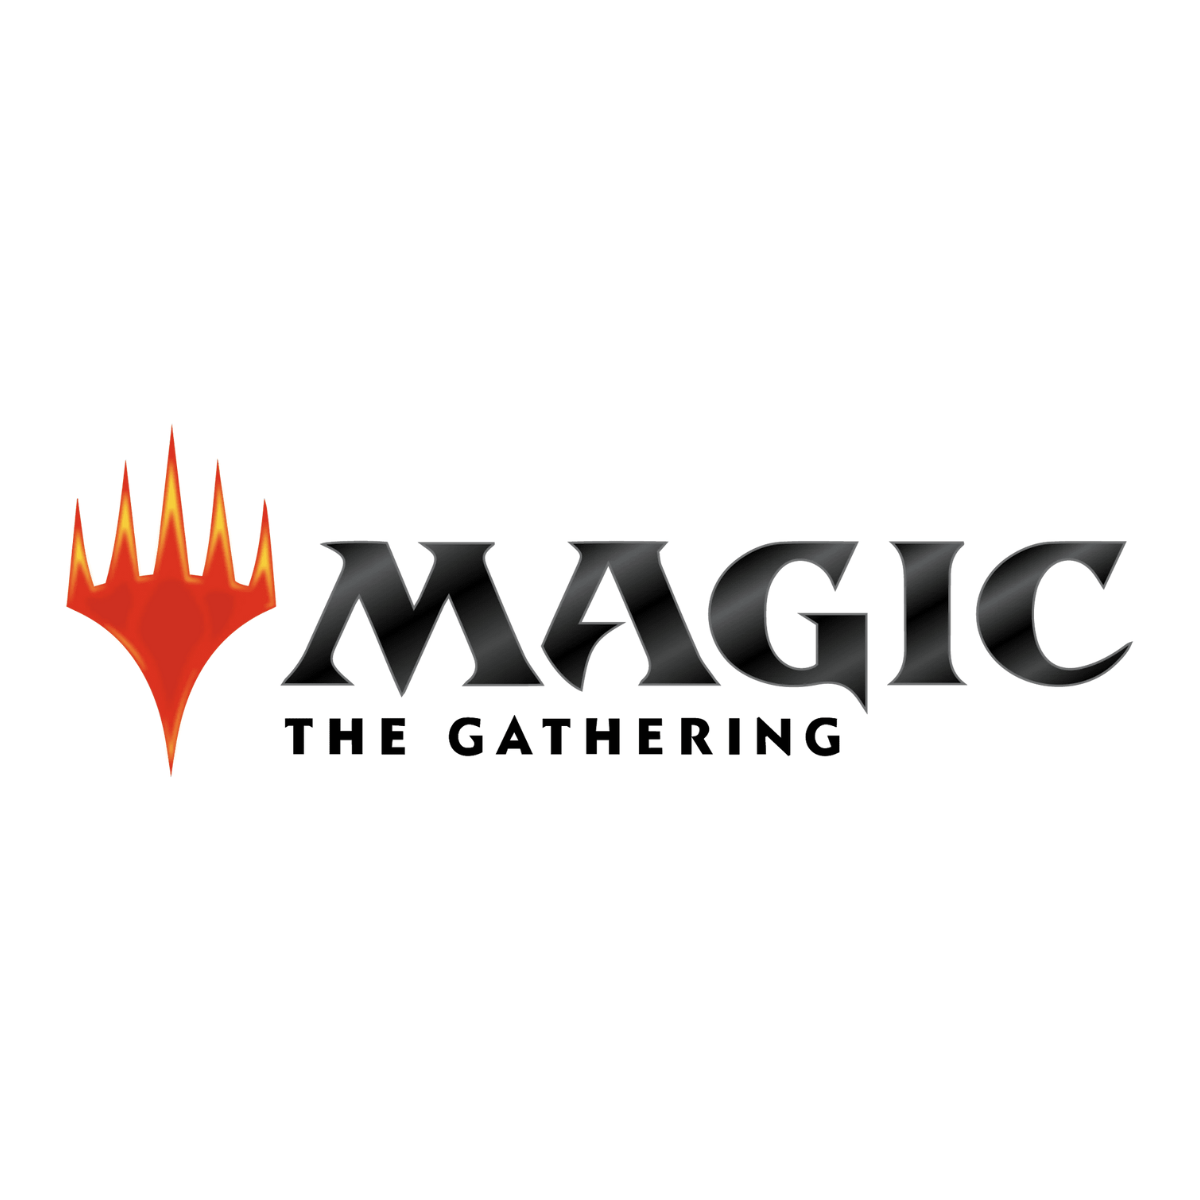 Magic: The Gathering Character Sleeve Collection [MTGS-229] "Dominaria United - Leyline Binding"-Ensky-Ace Cards & Collectibles